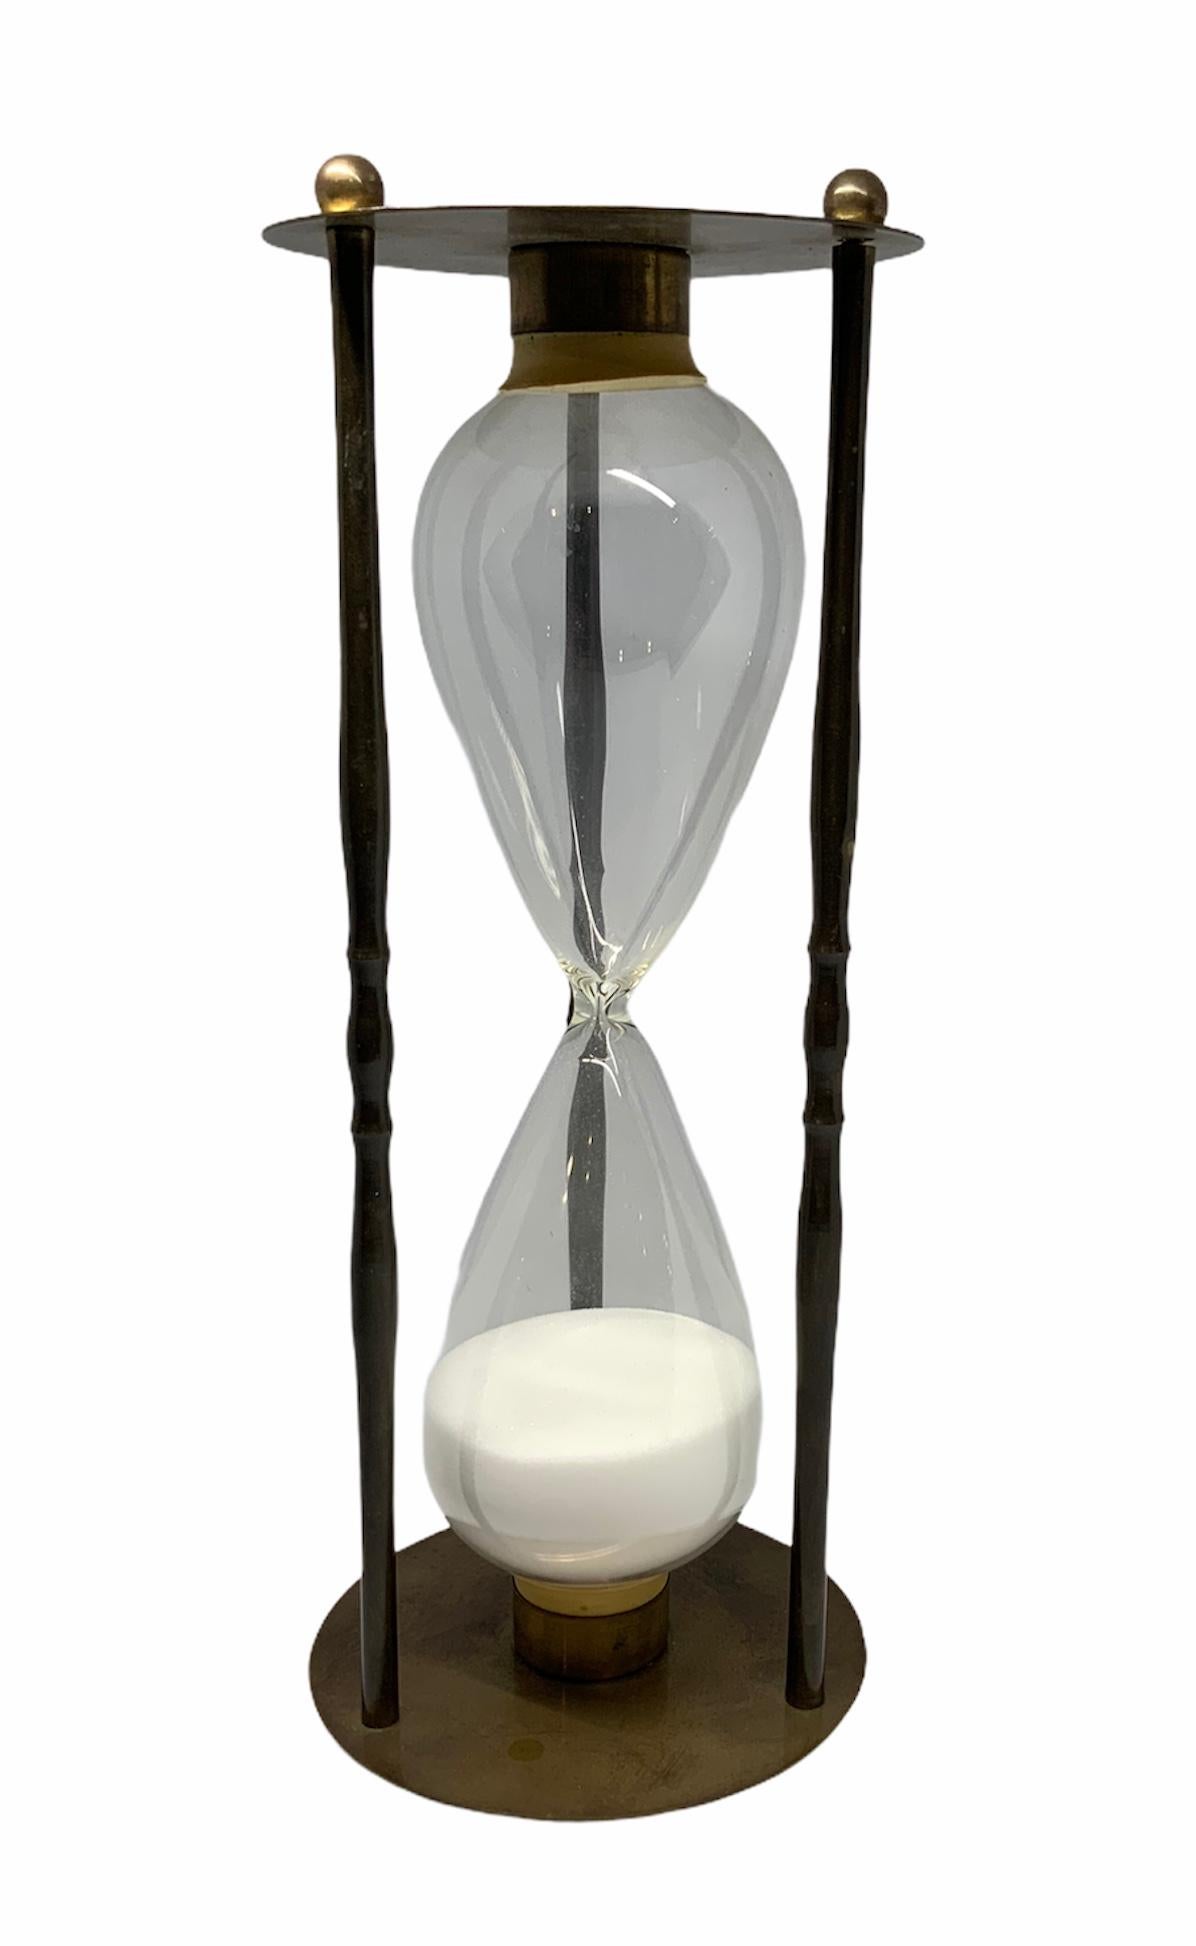 This a sand clock made with glass and brass. Two round brass plates joined by three brass columns semi-enclosed the eight shaped glass containing the sand. Three small brass sphere serve as feet. The timer lasts 30 minutes.